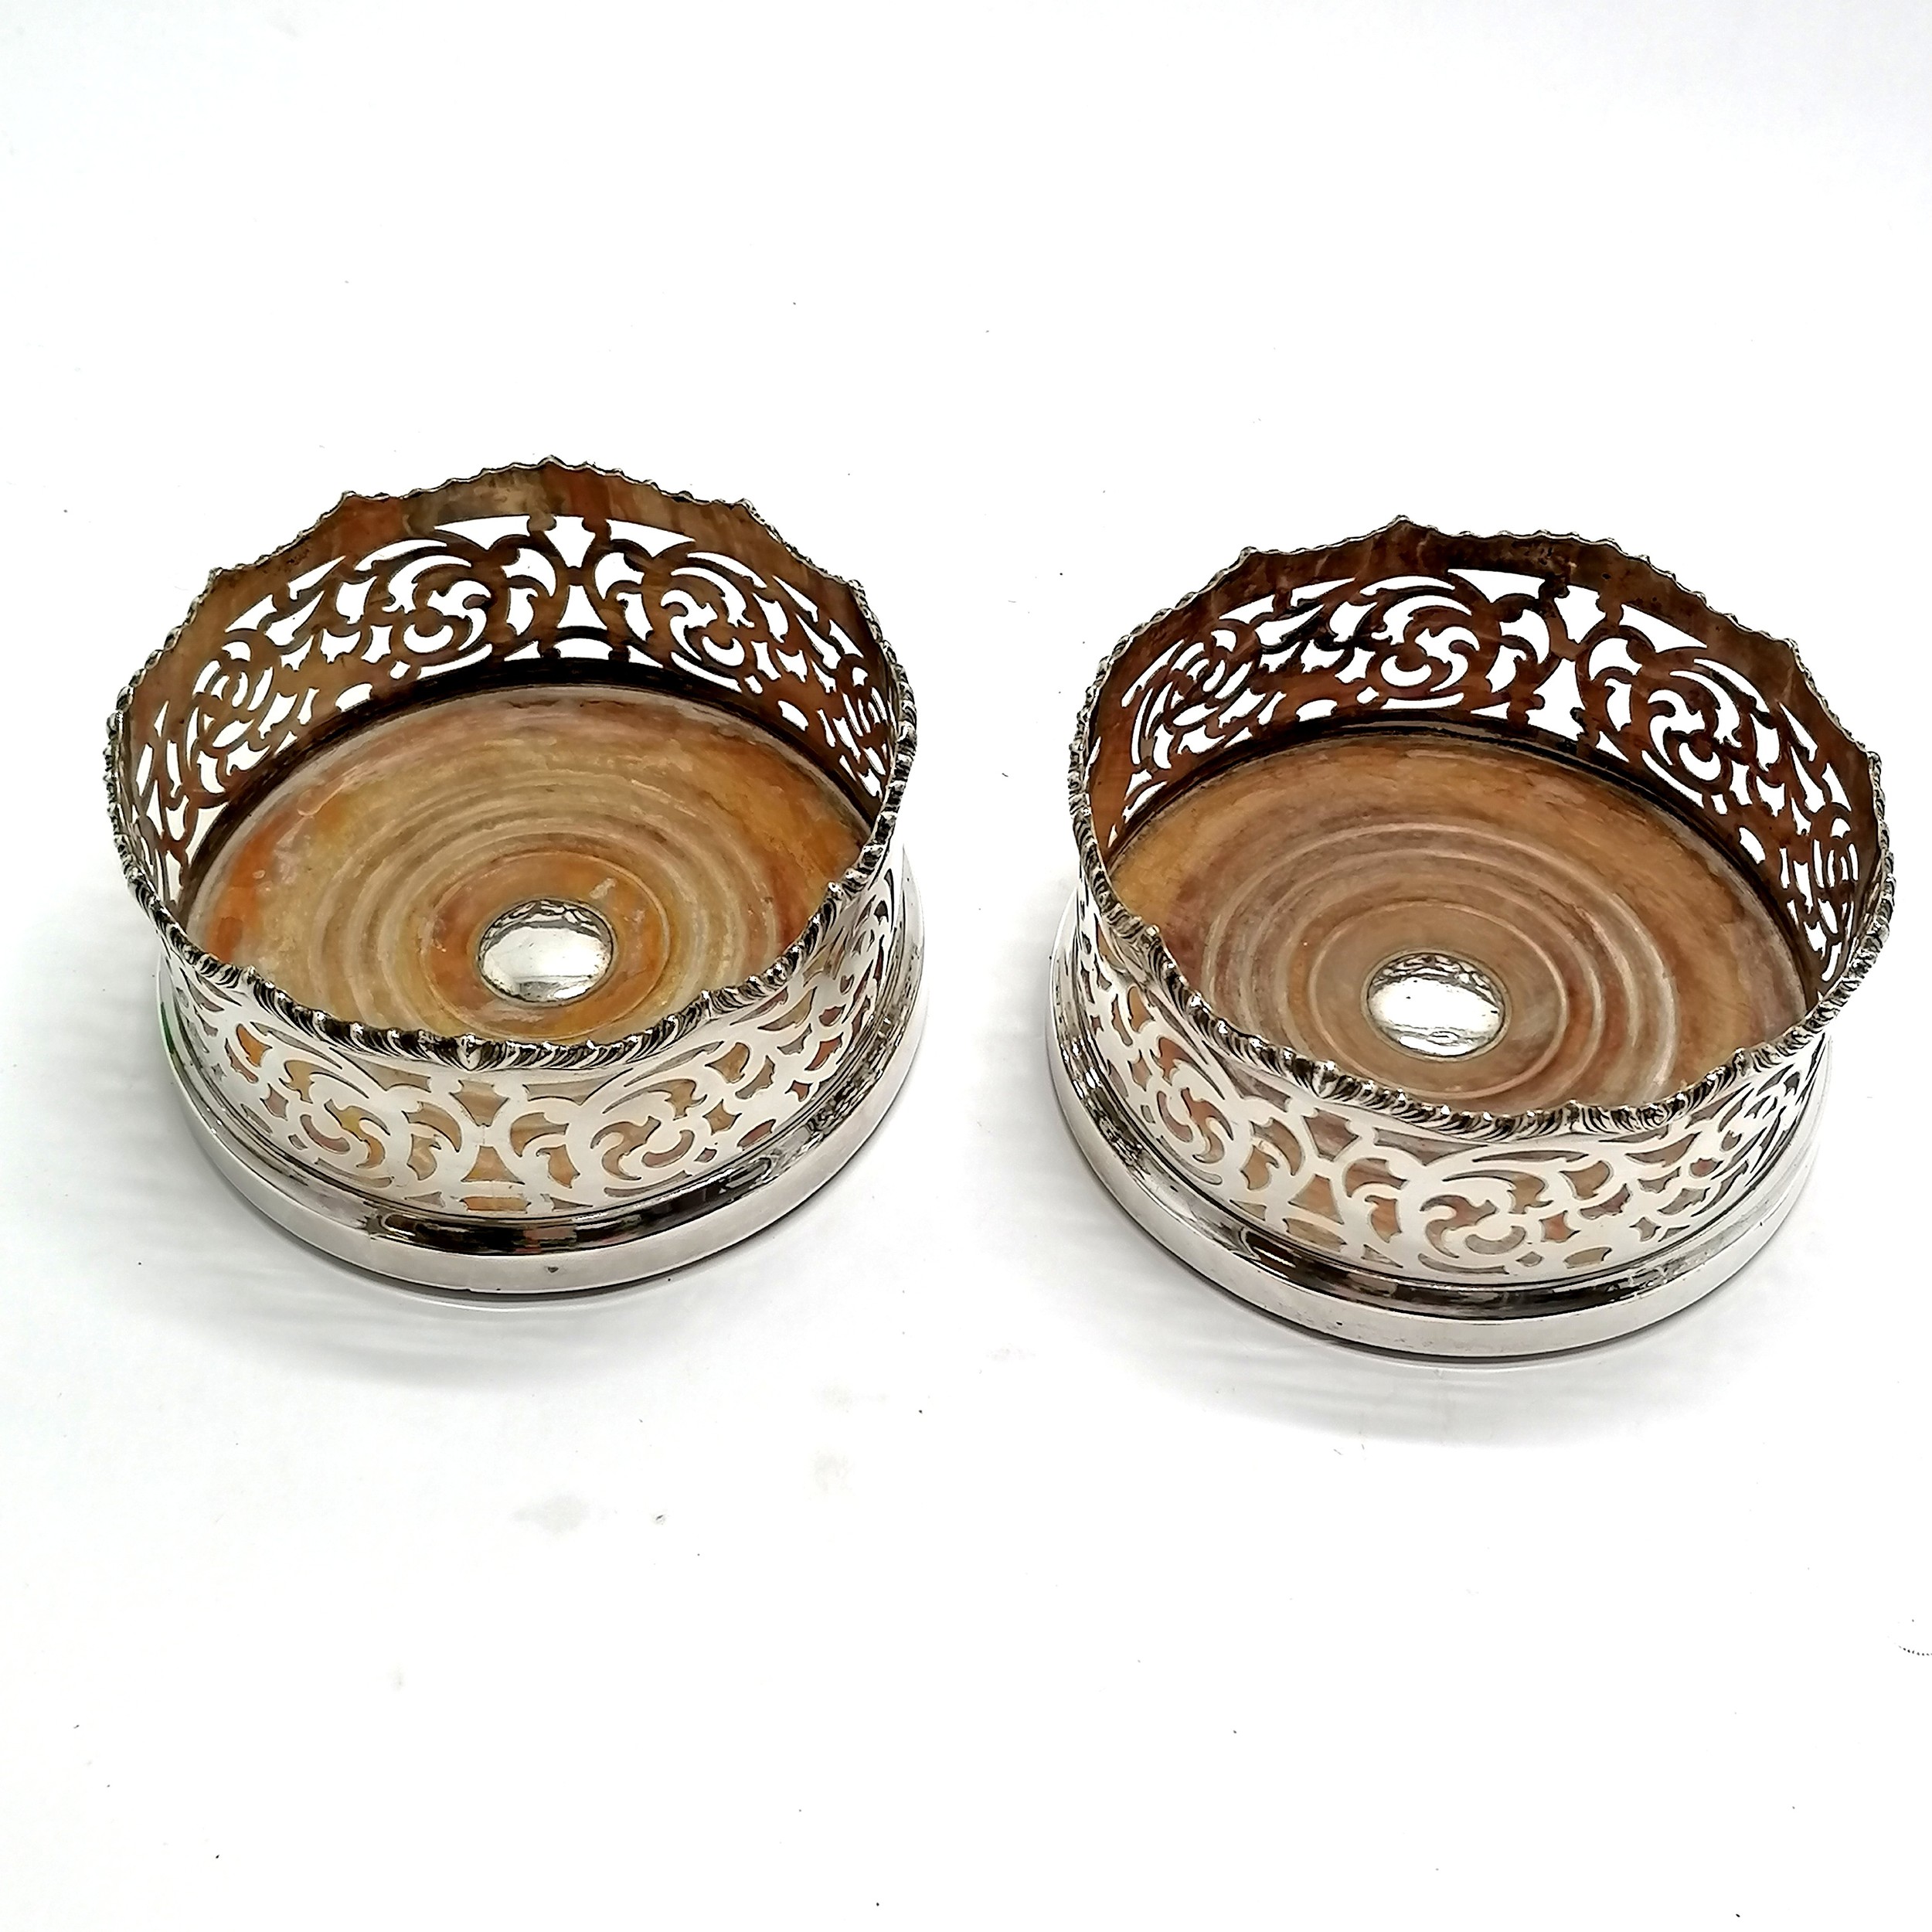 Pair of antique bottle coasters with turned wooden bases and high pierced gallery detail - 14cm - Image 3 of 5